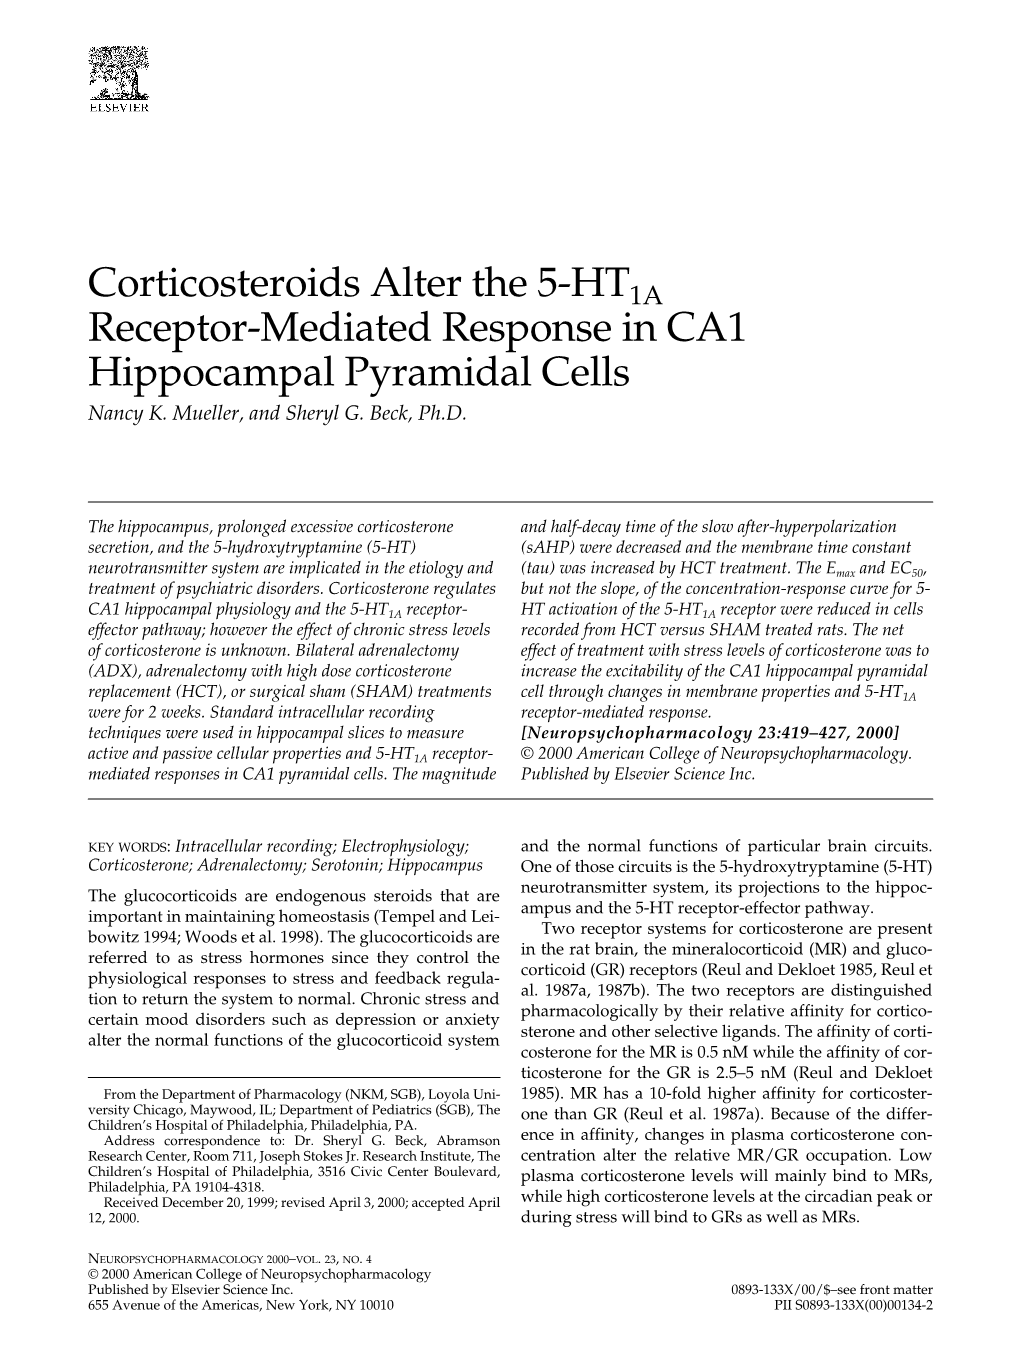 Corticosteroids Alter the 5-HT1A Receptor-Mediated Response in CA1 Hippocampal Pyramidal Cells Nancy K